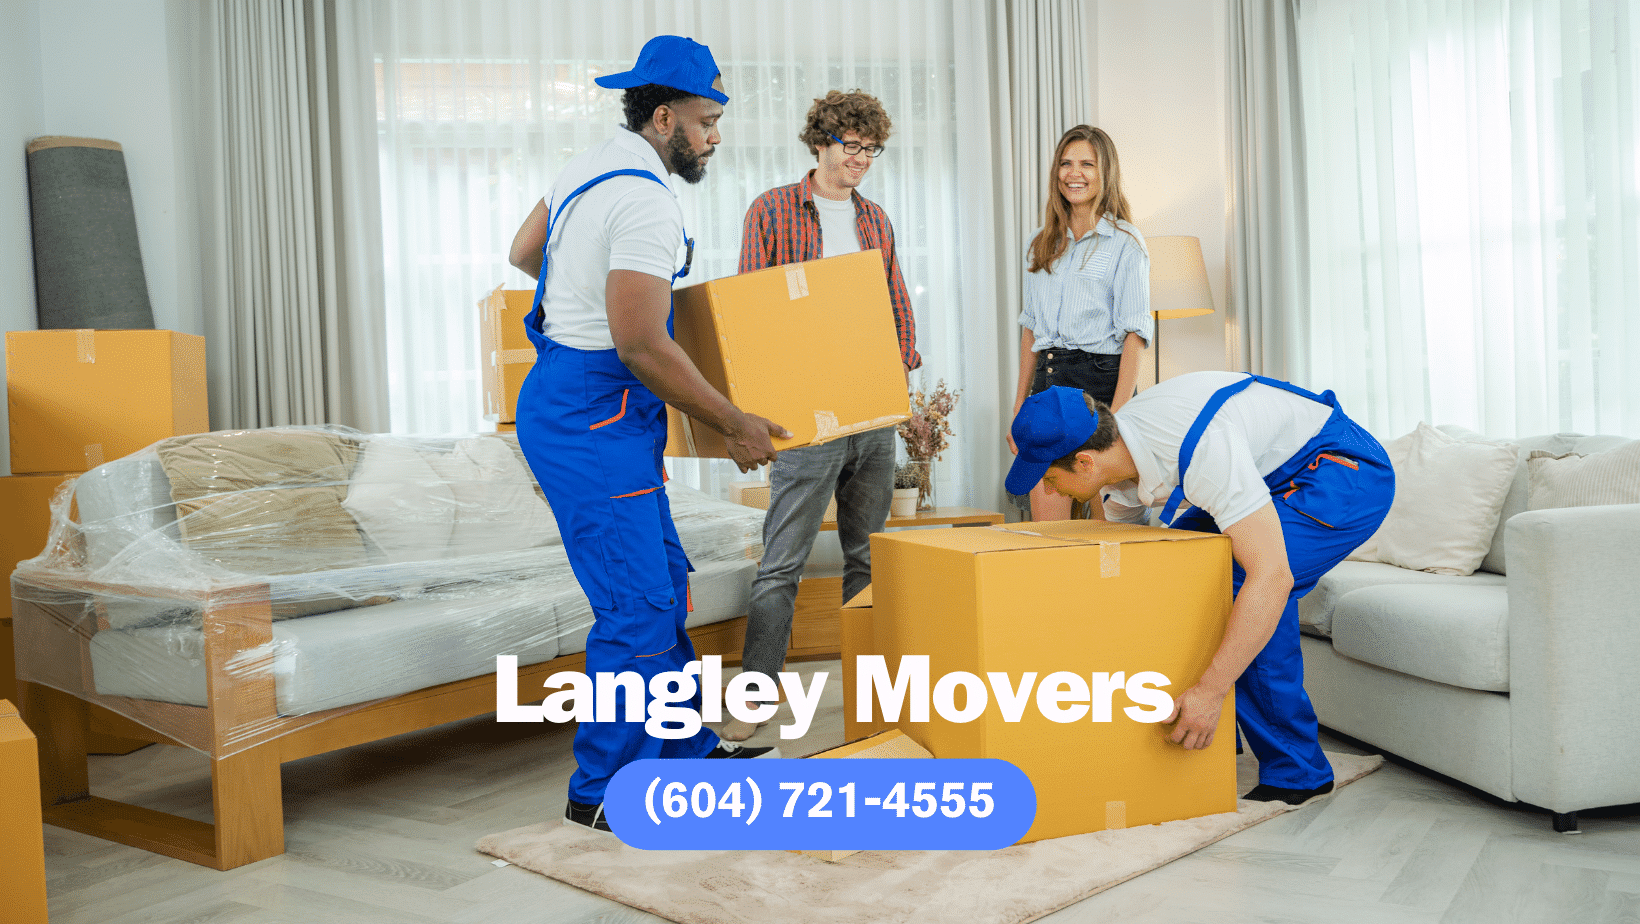 1PRO Langley Moving Crew in Action